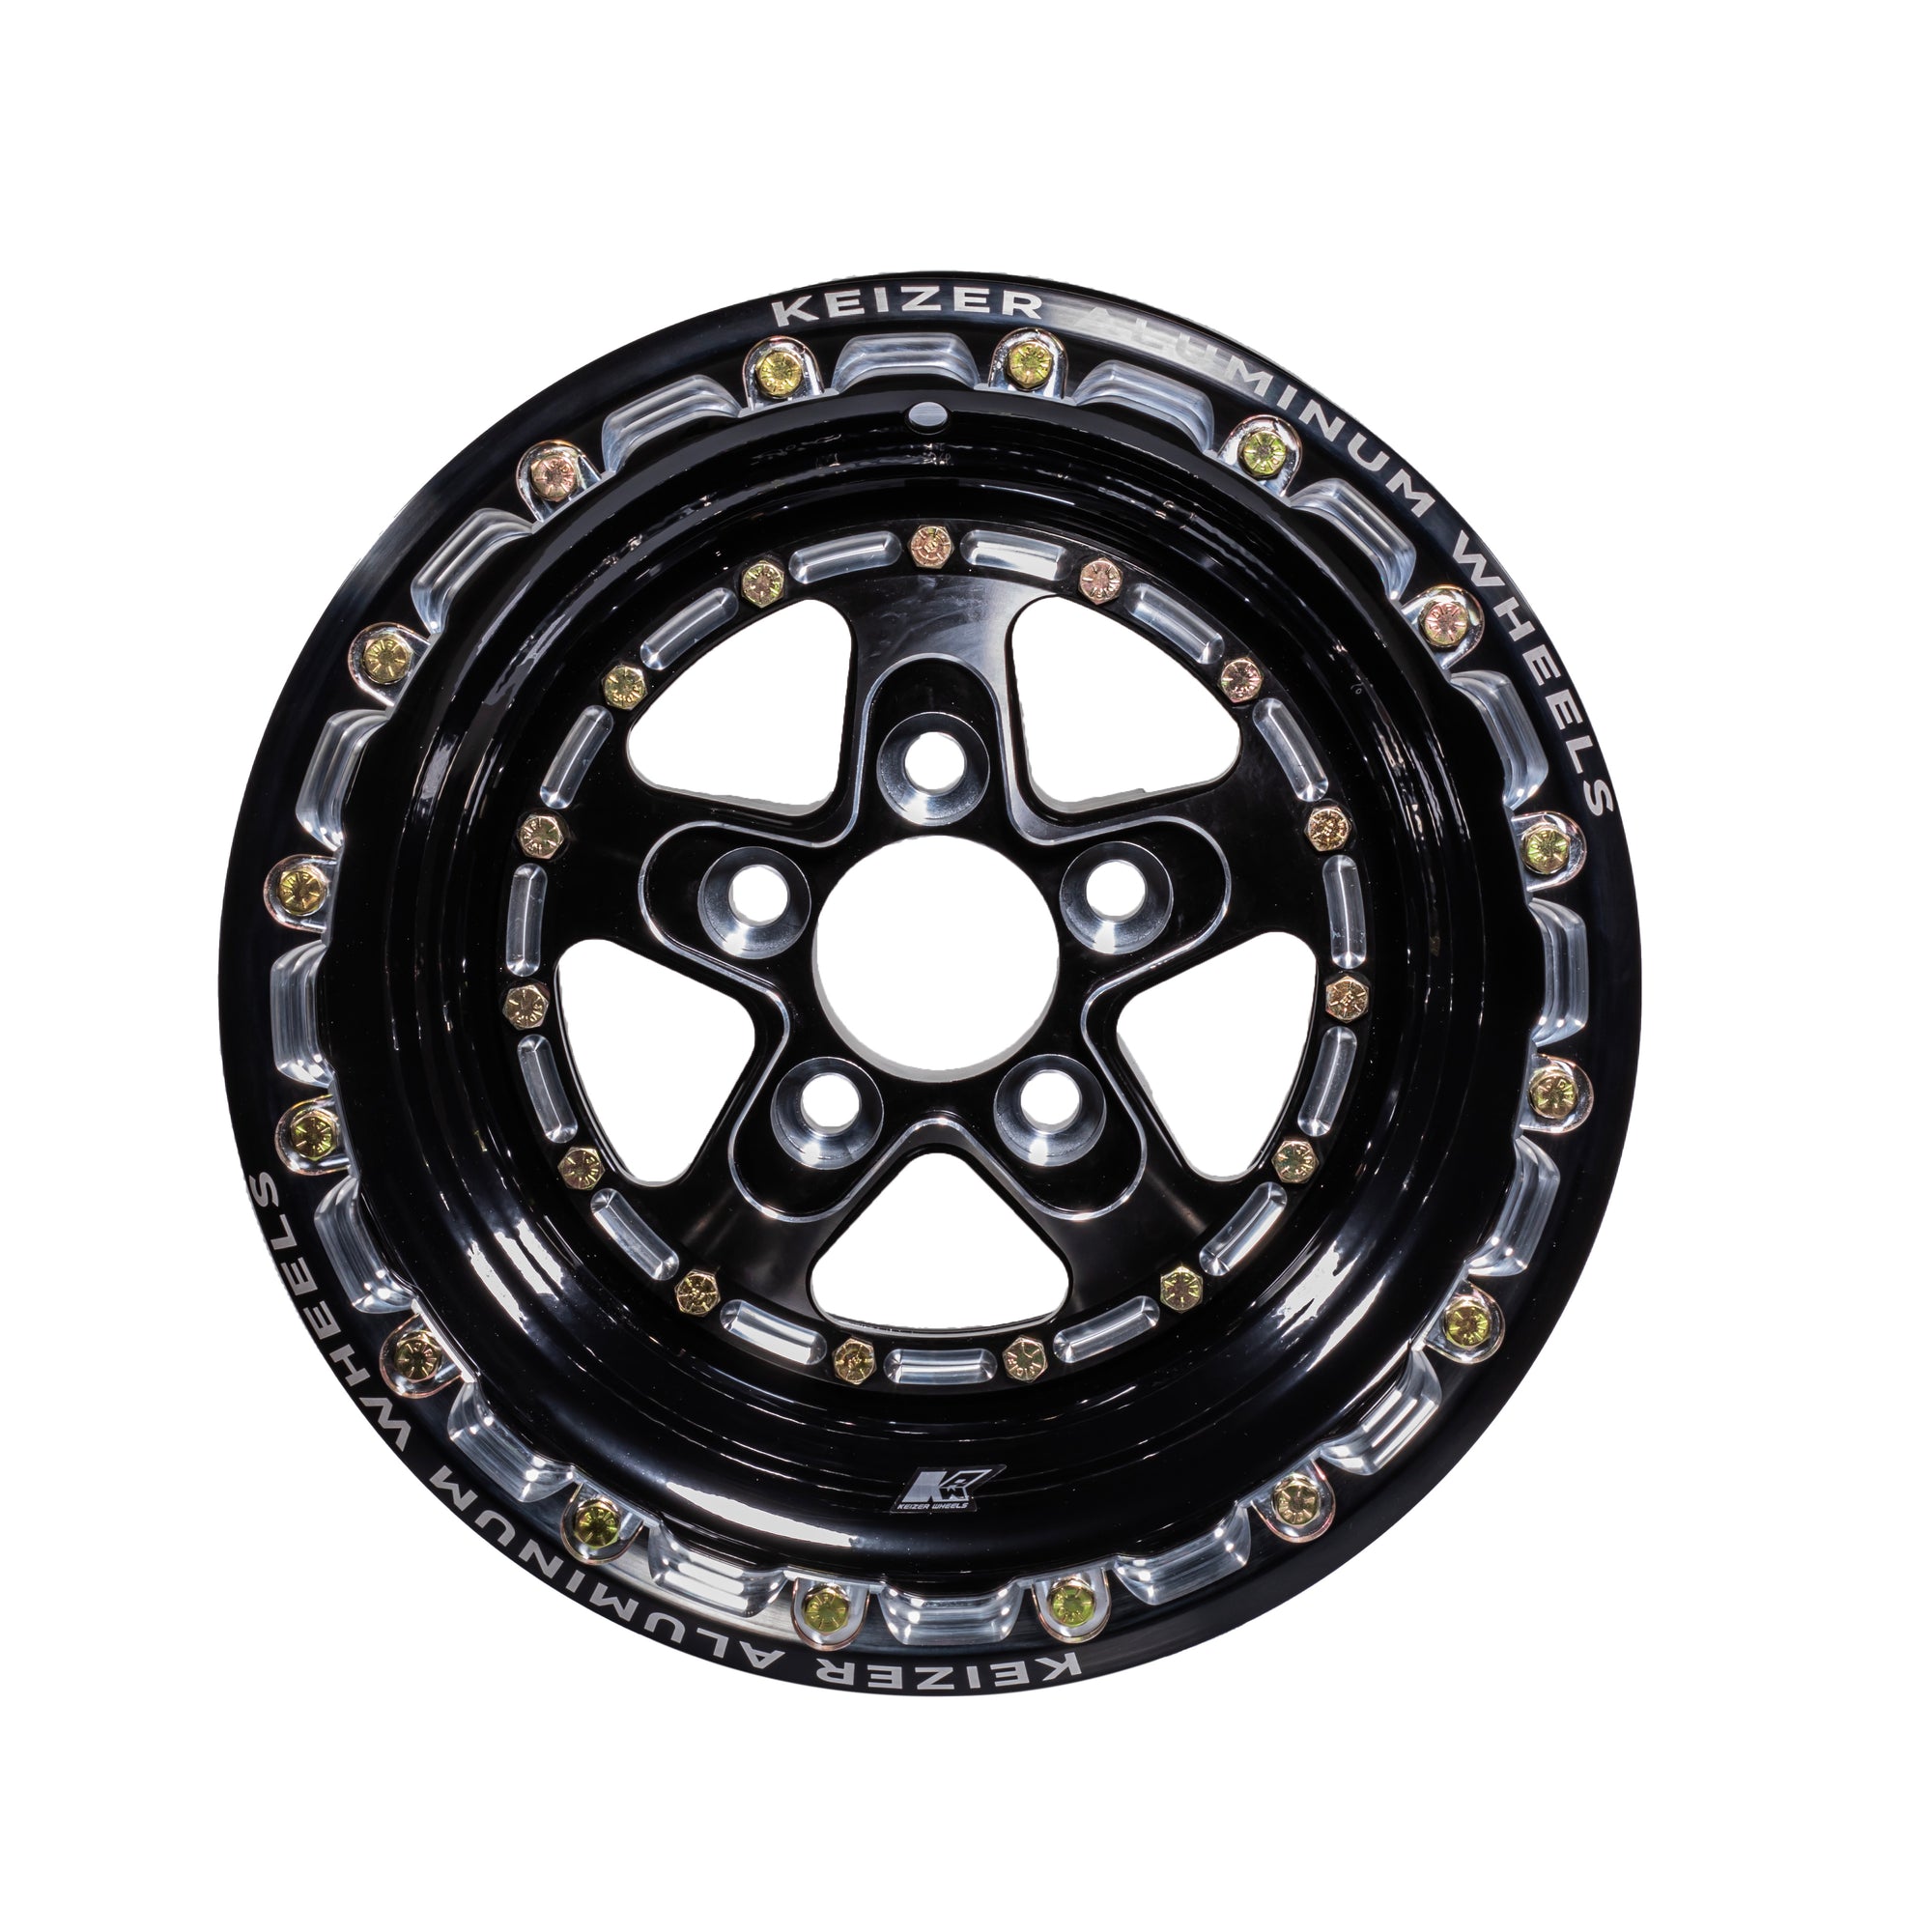 KEIZER FULL HOUSE FORGED WHEEL (REAR)